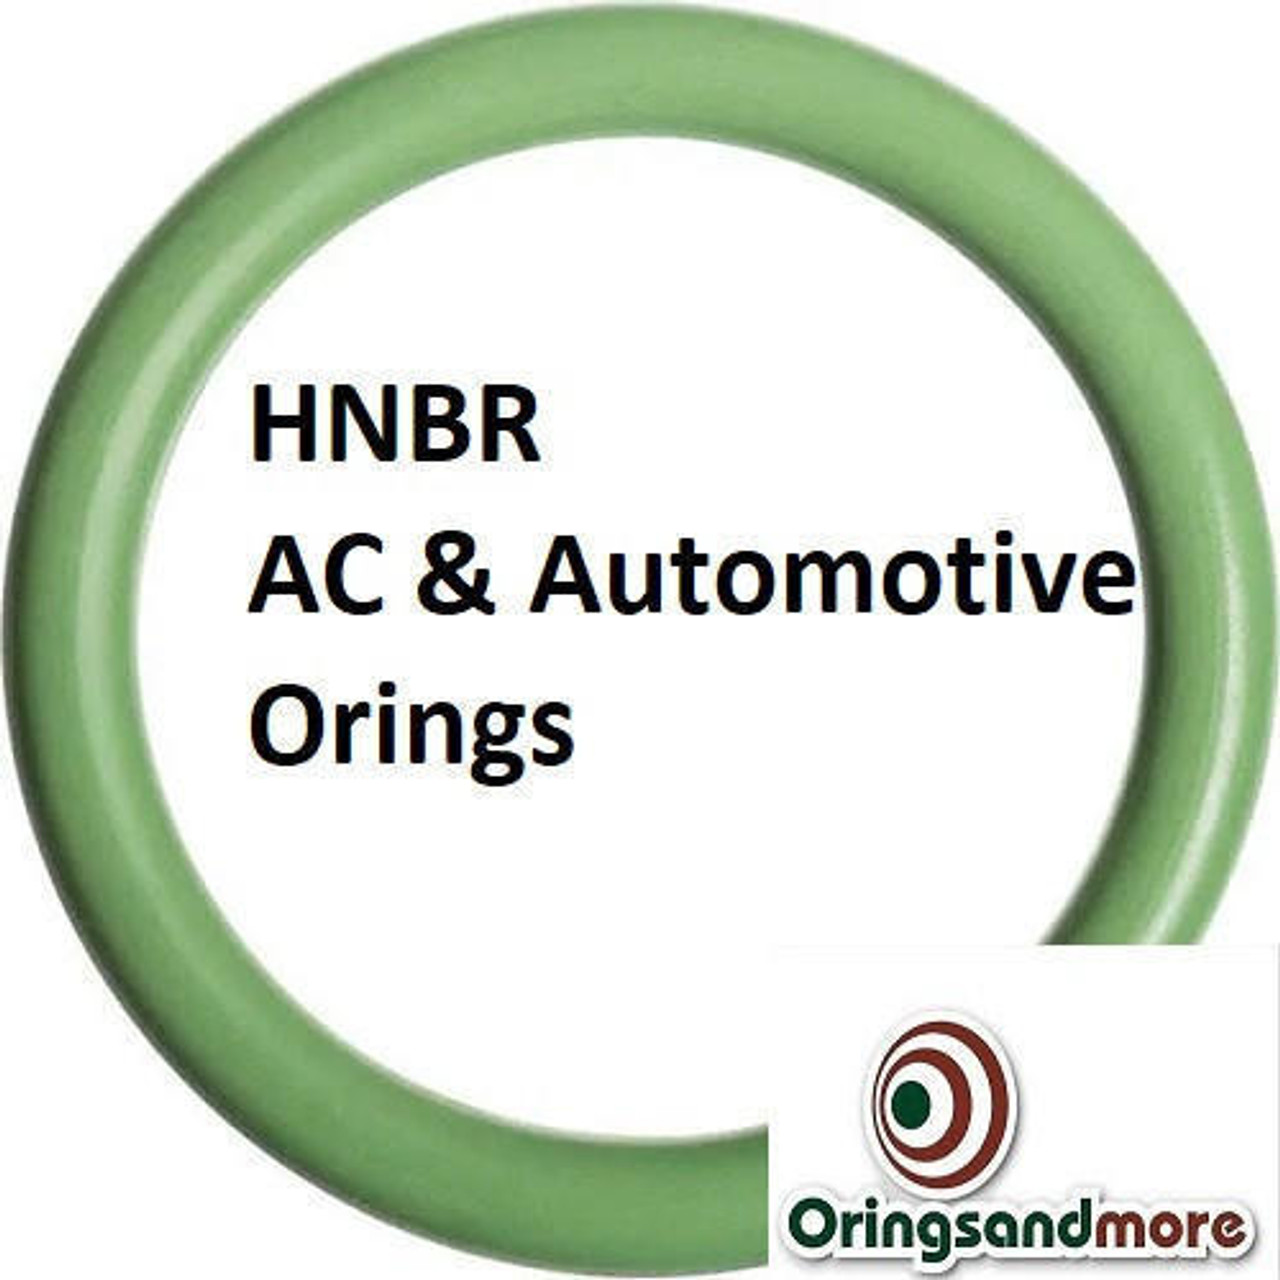 HNBR Orings  # 171-70D Green Price for 1 pc